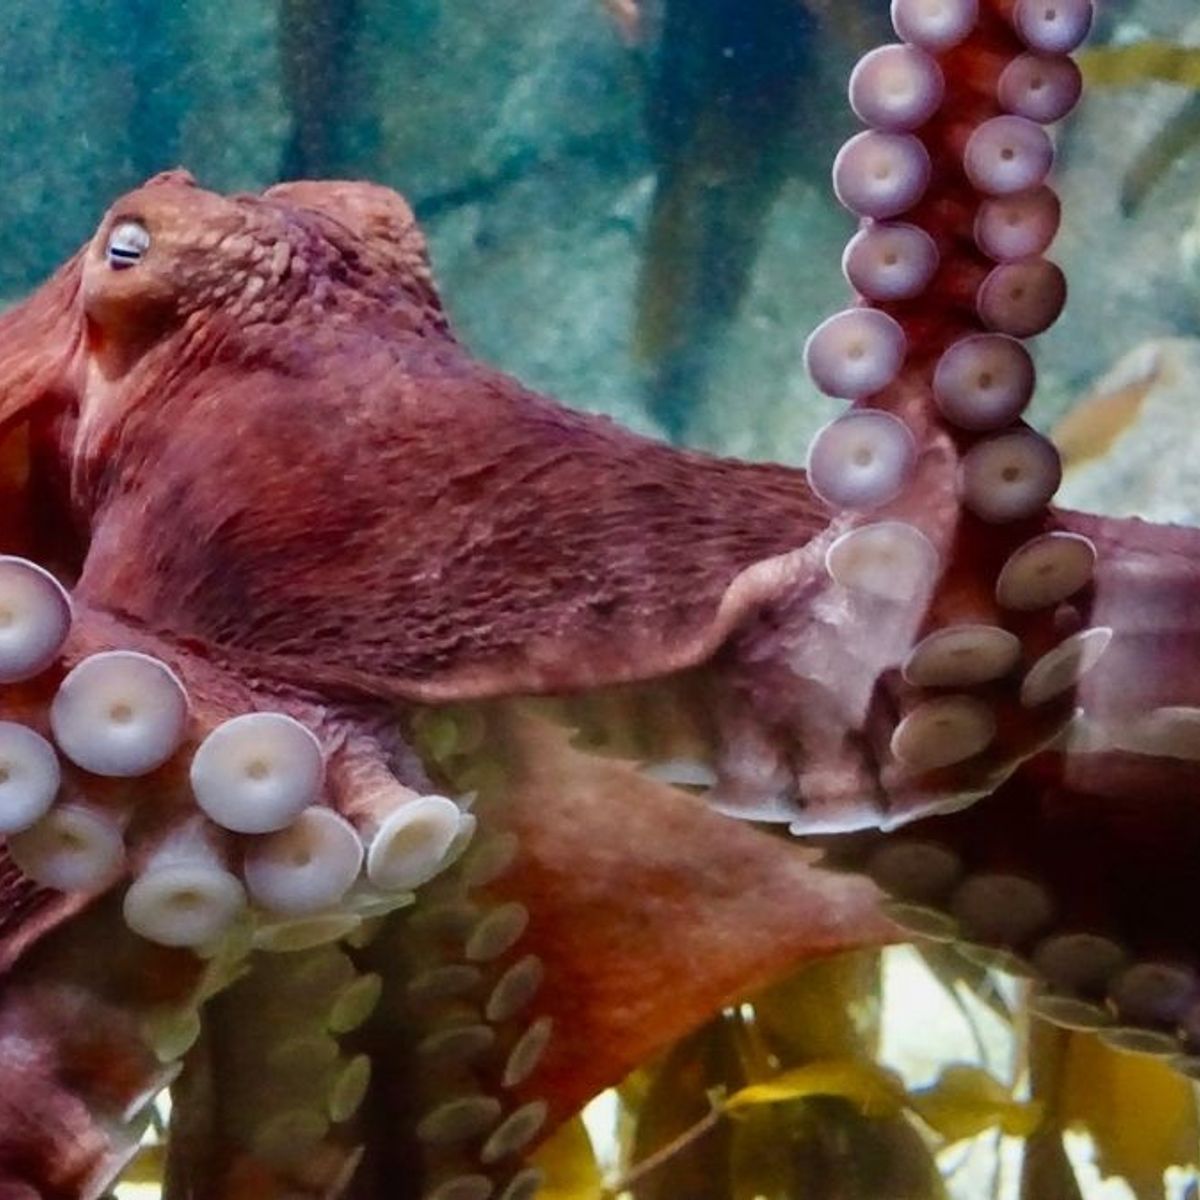 Did an Octopus Throw a Spoiled Shrimp at Its Handler?